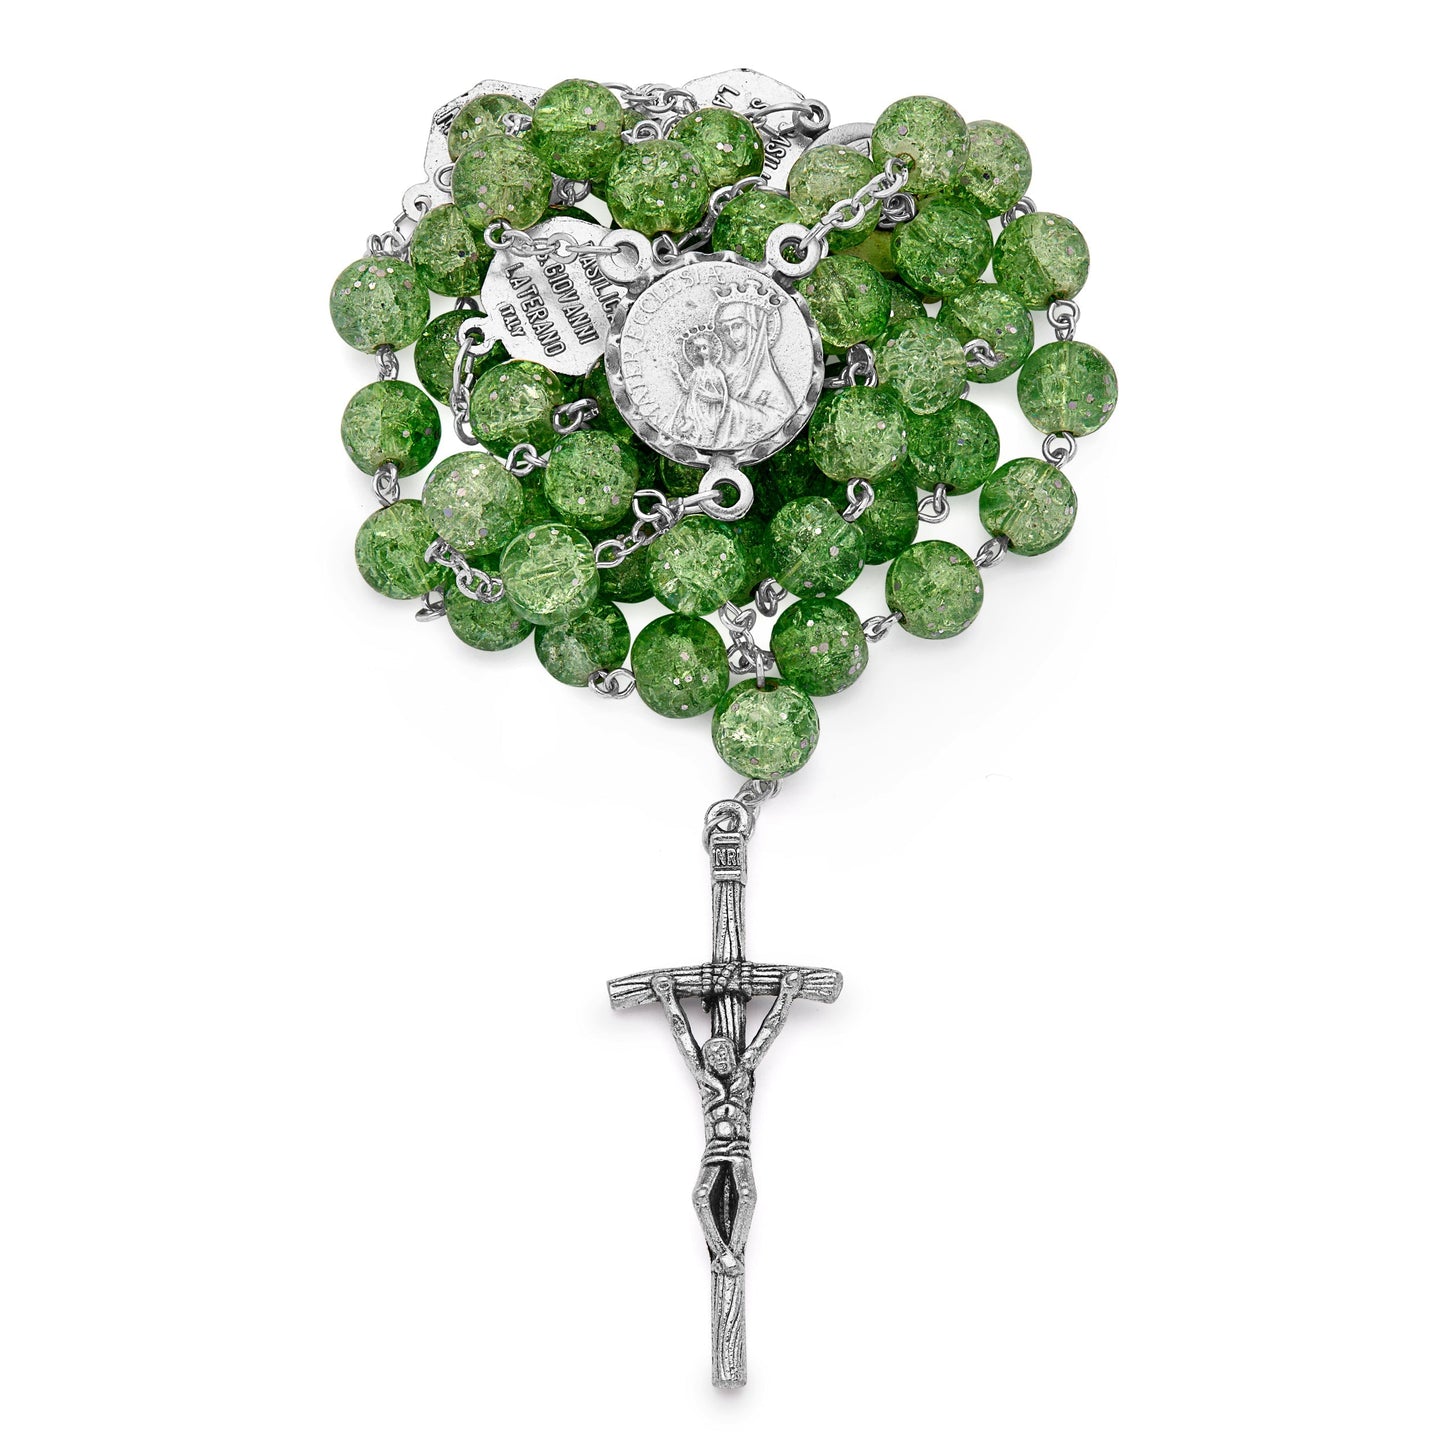 MONDO CATTOLICO Prayer Beads 53.5 cm (21.06 in) / 8 mm (0.31 in) Mater Ecclesiae Rosary in Green Glitter Beads